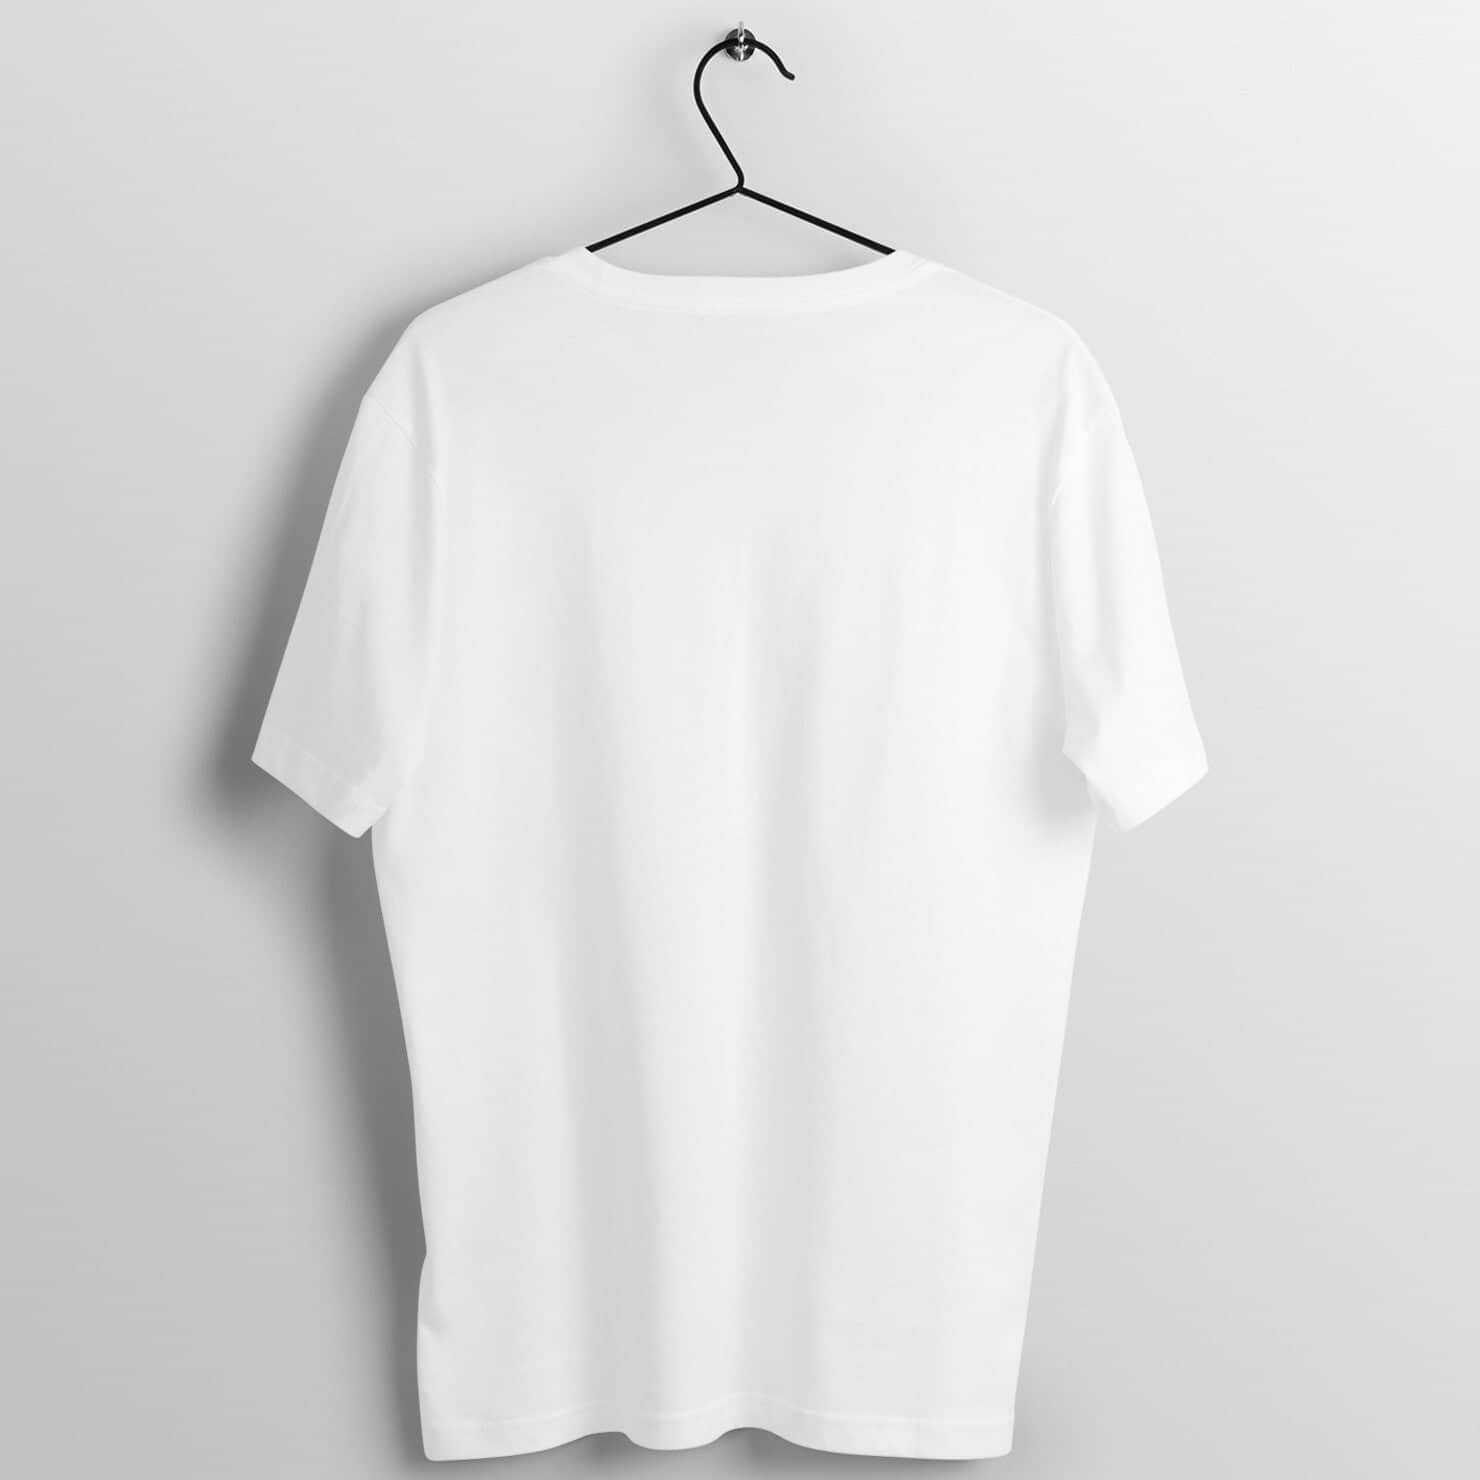 Save Soil and Nature Exclusive White T Shirt for Men and Women Shirts & Tops Printrove 